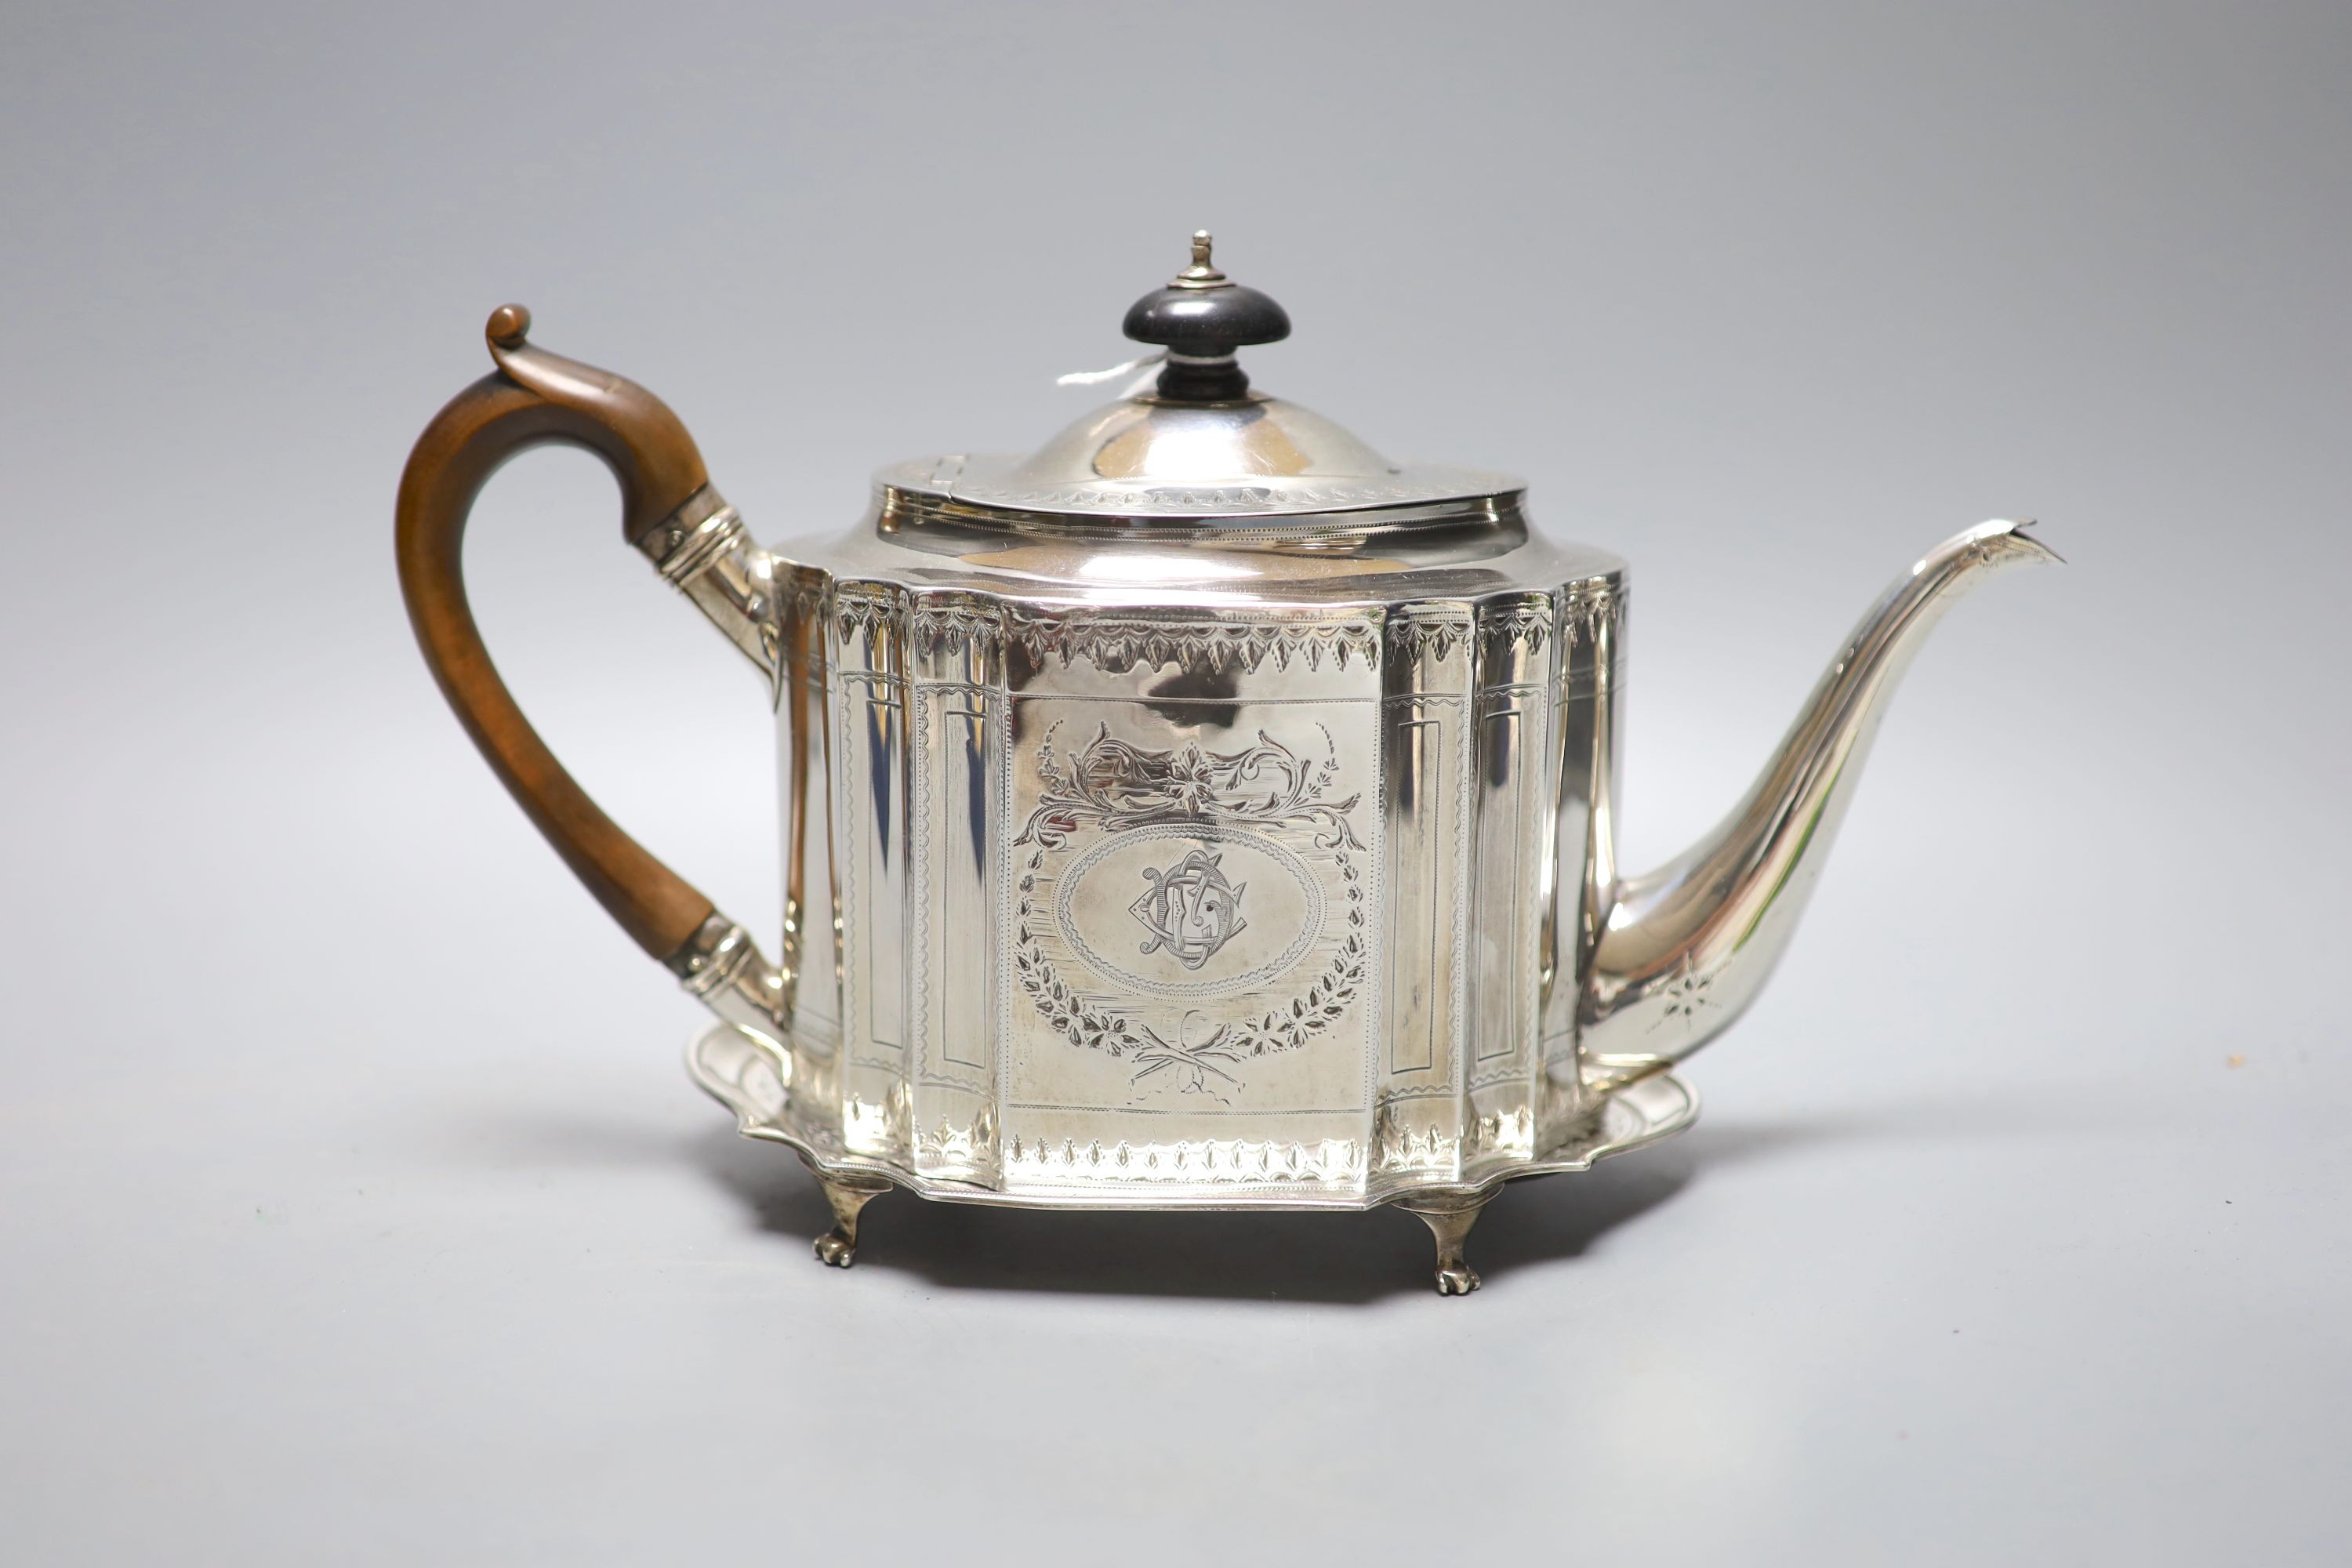 A George III bright cut engraved oval teapot and matching stand, Soloman Hougham, London, 1794, stand 19.3 cm, gross 20oz.